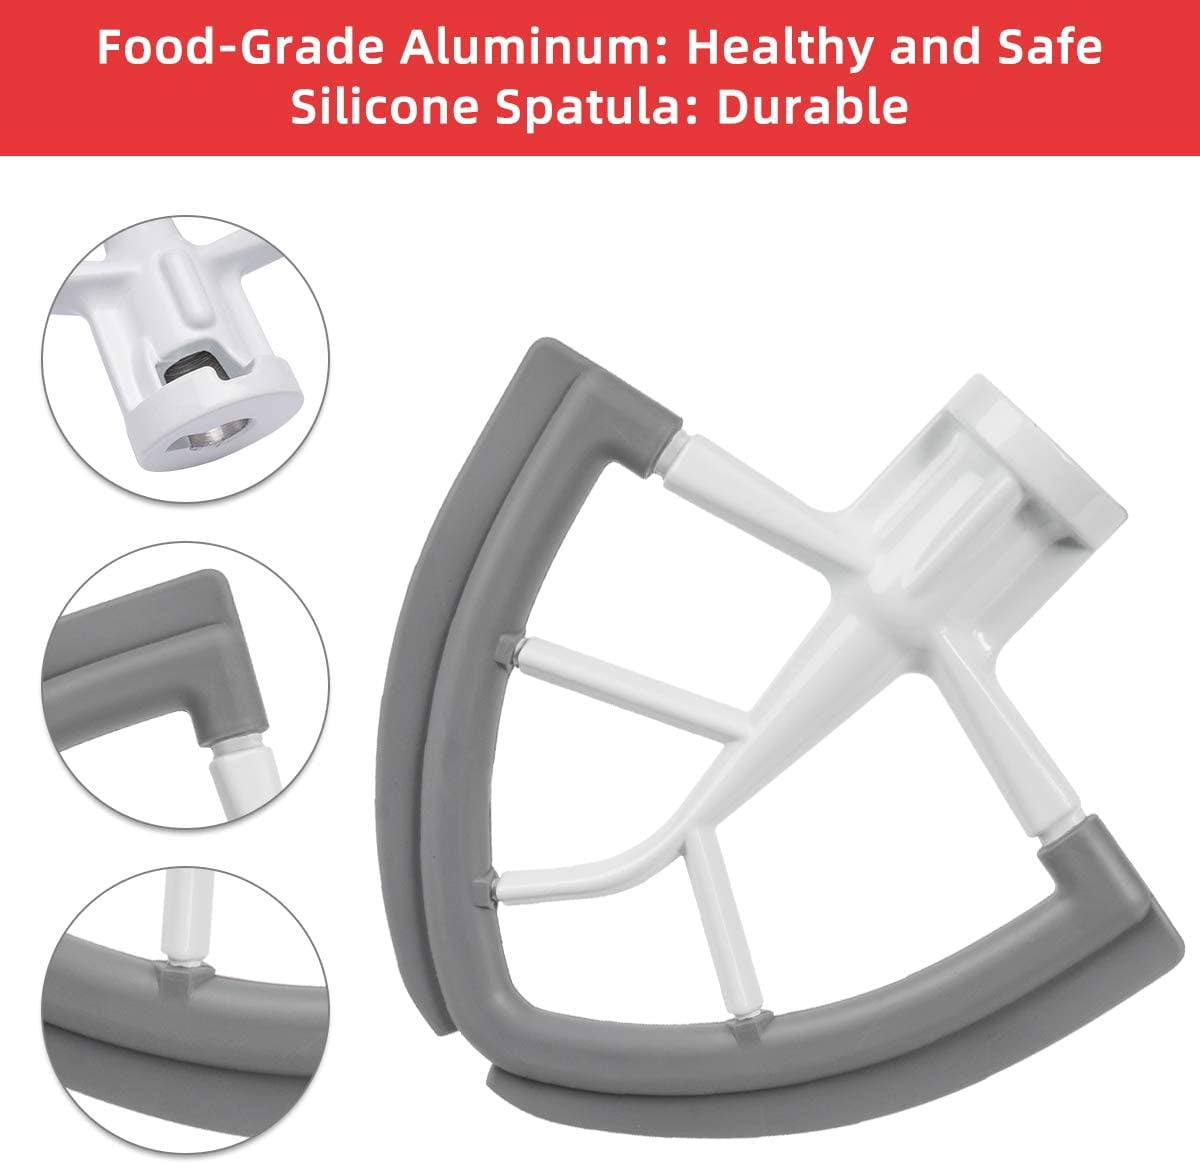 Roabertic Flex Edge Beater for KitchenAid Bowl-Lift Stand Mixer - 6 Quart Flat Beater Paddle with Flexible Silicone Edges